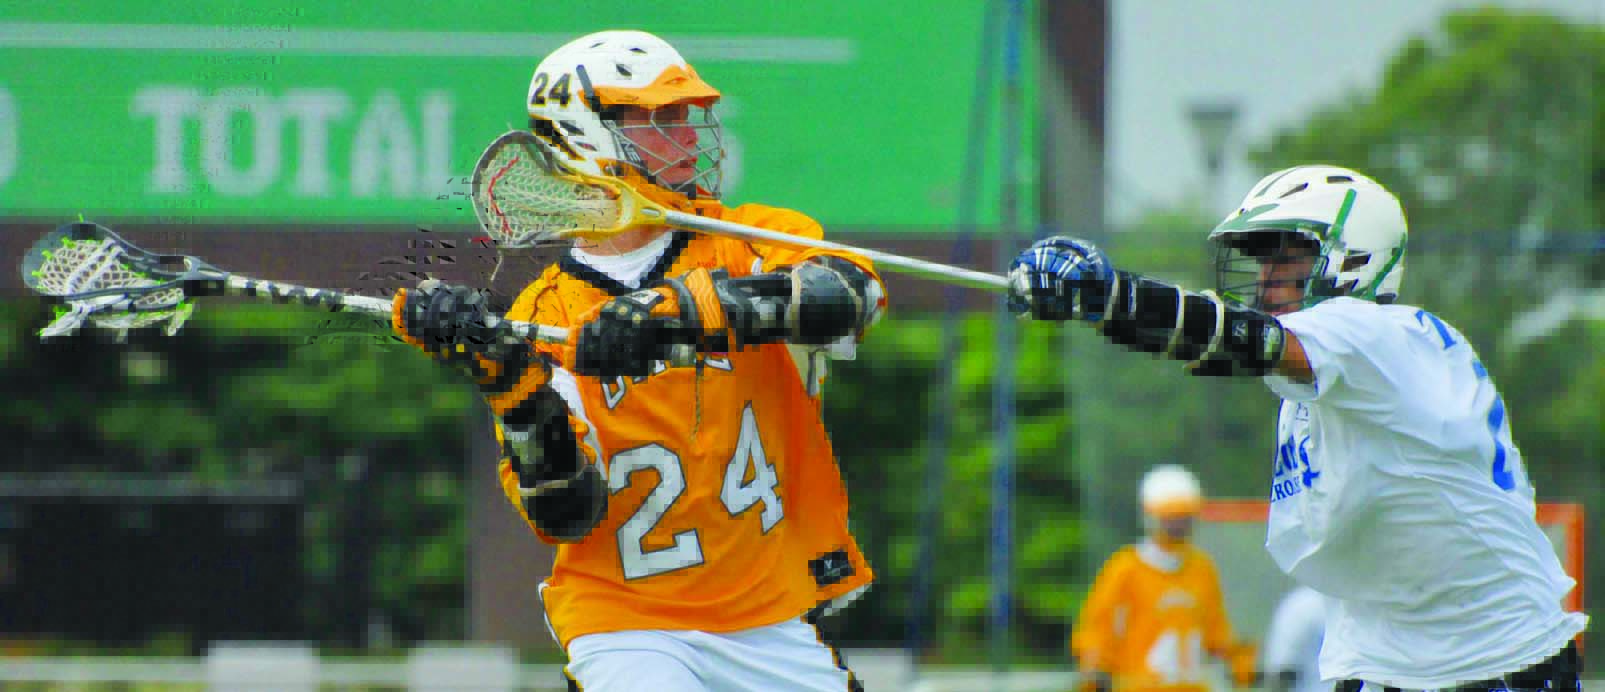 Two lacrosse players lunge for ball